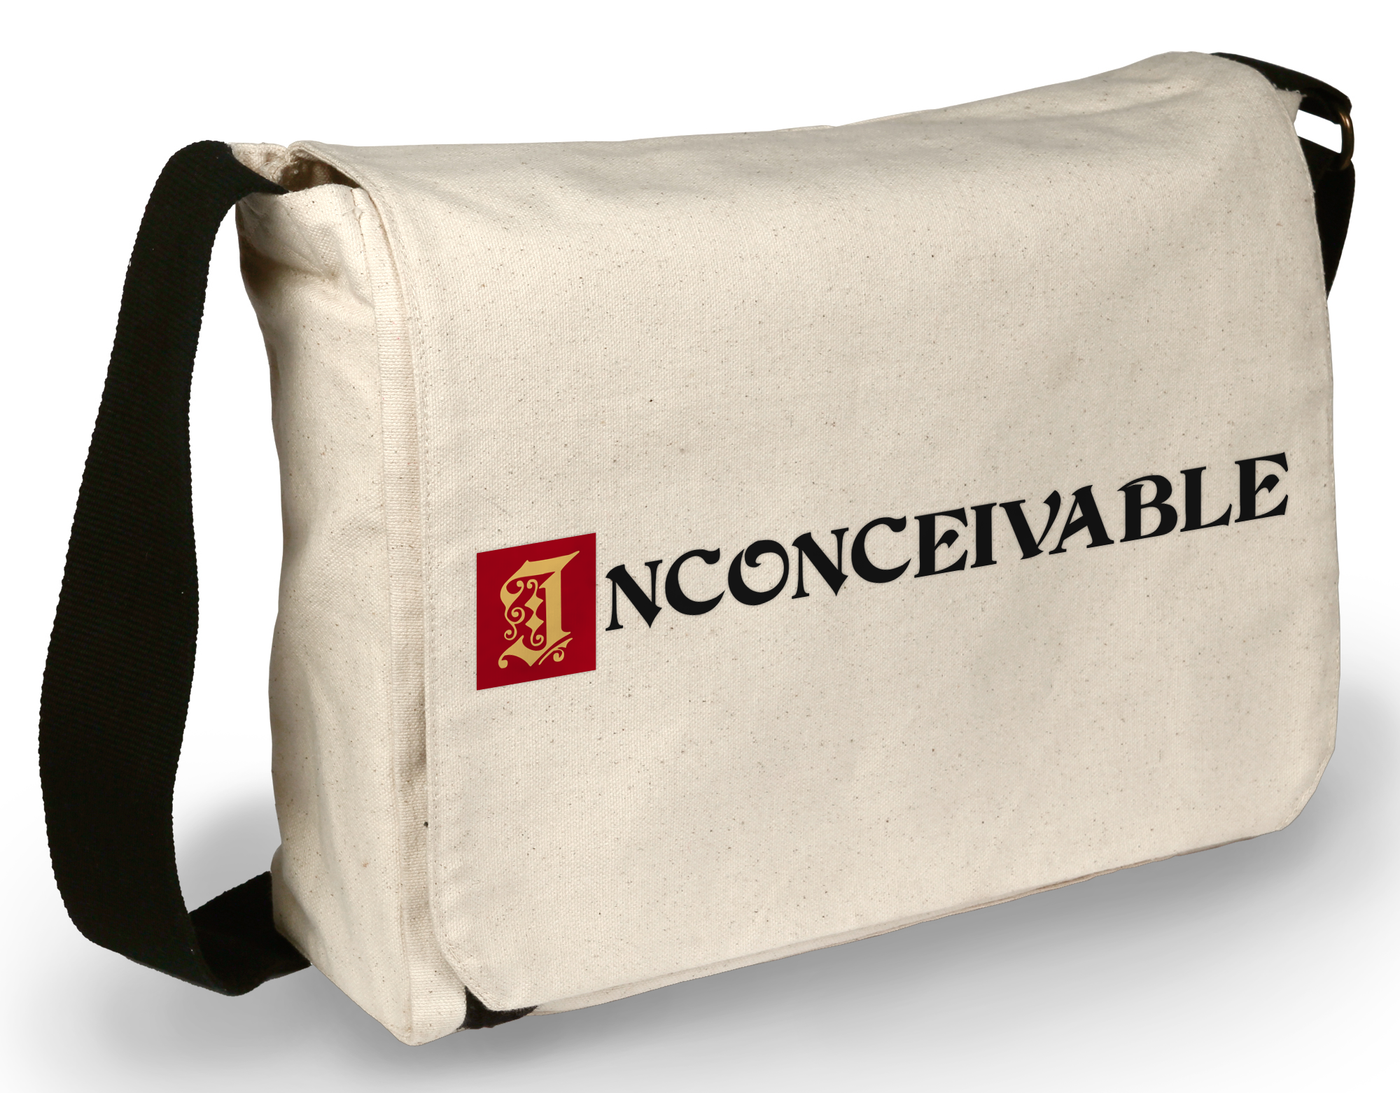 Storybook style "inconceivable" design